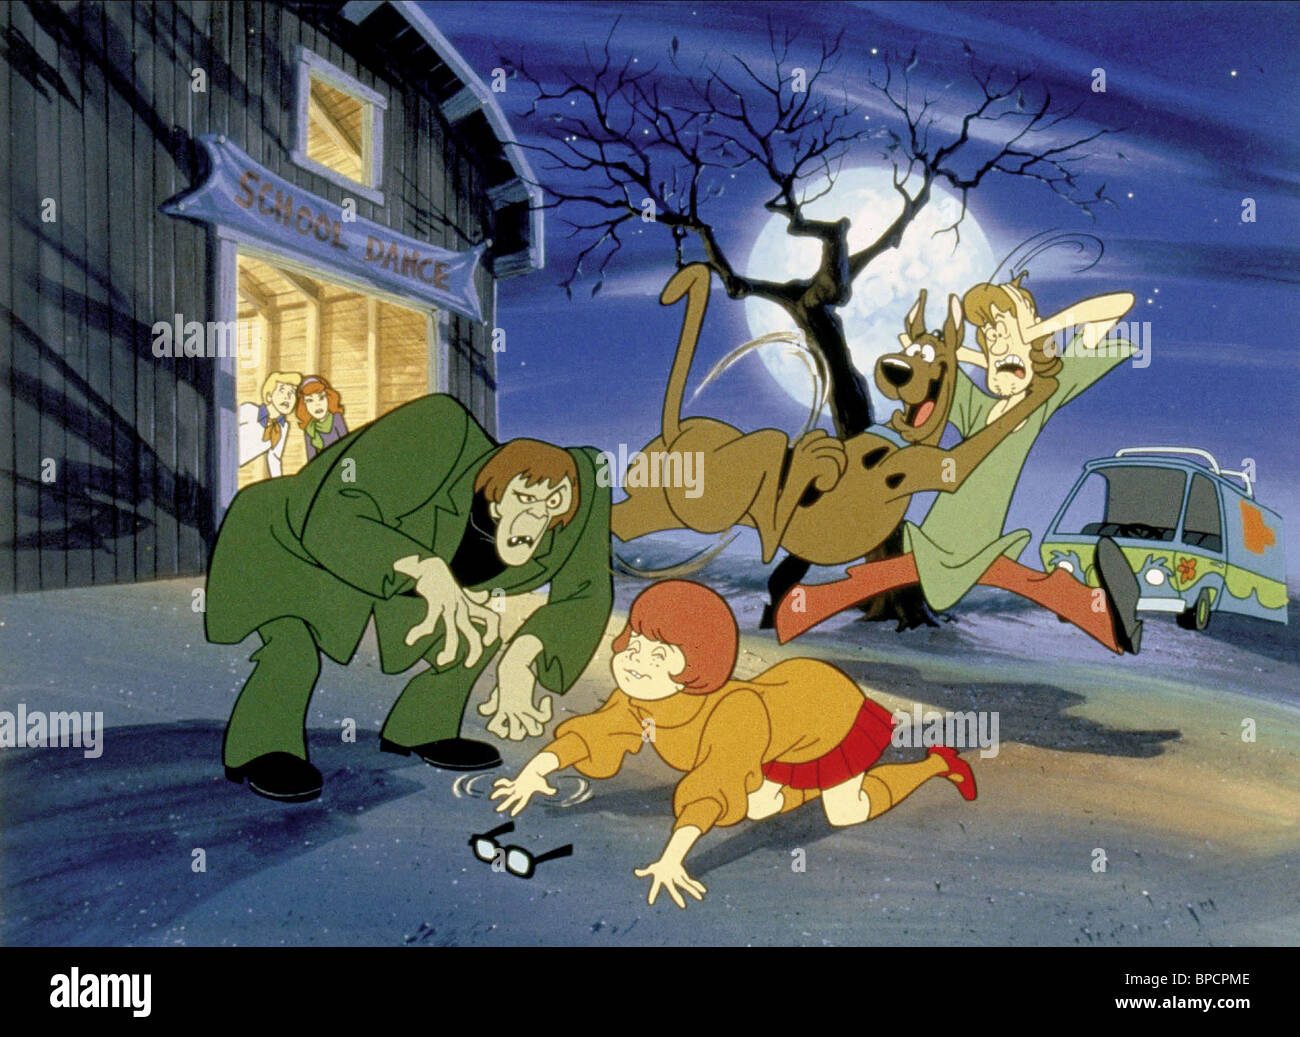 Velma Scooby High Resolution Stock Photography and Images - Alamy